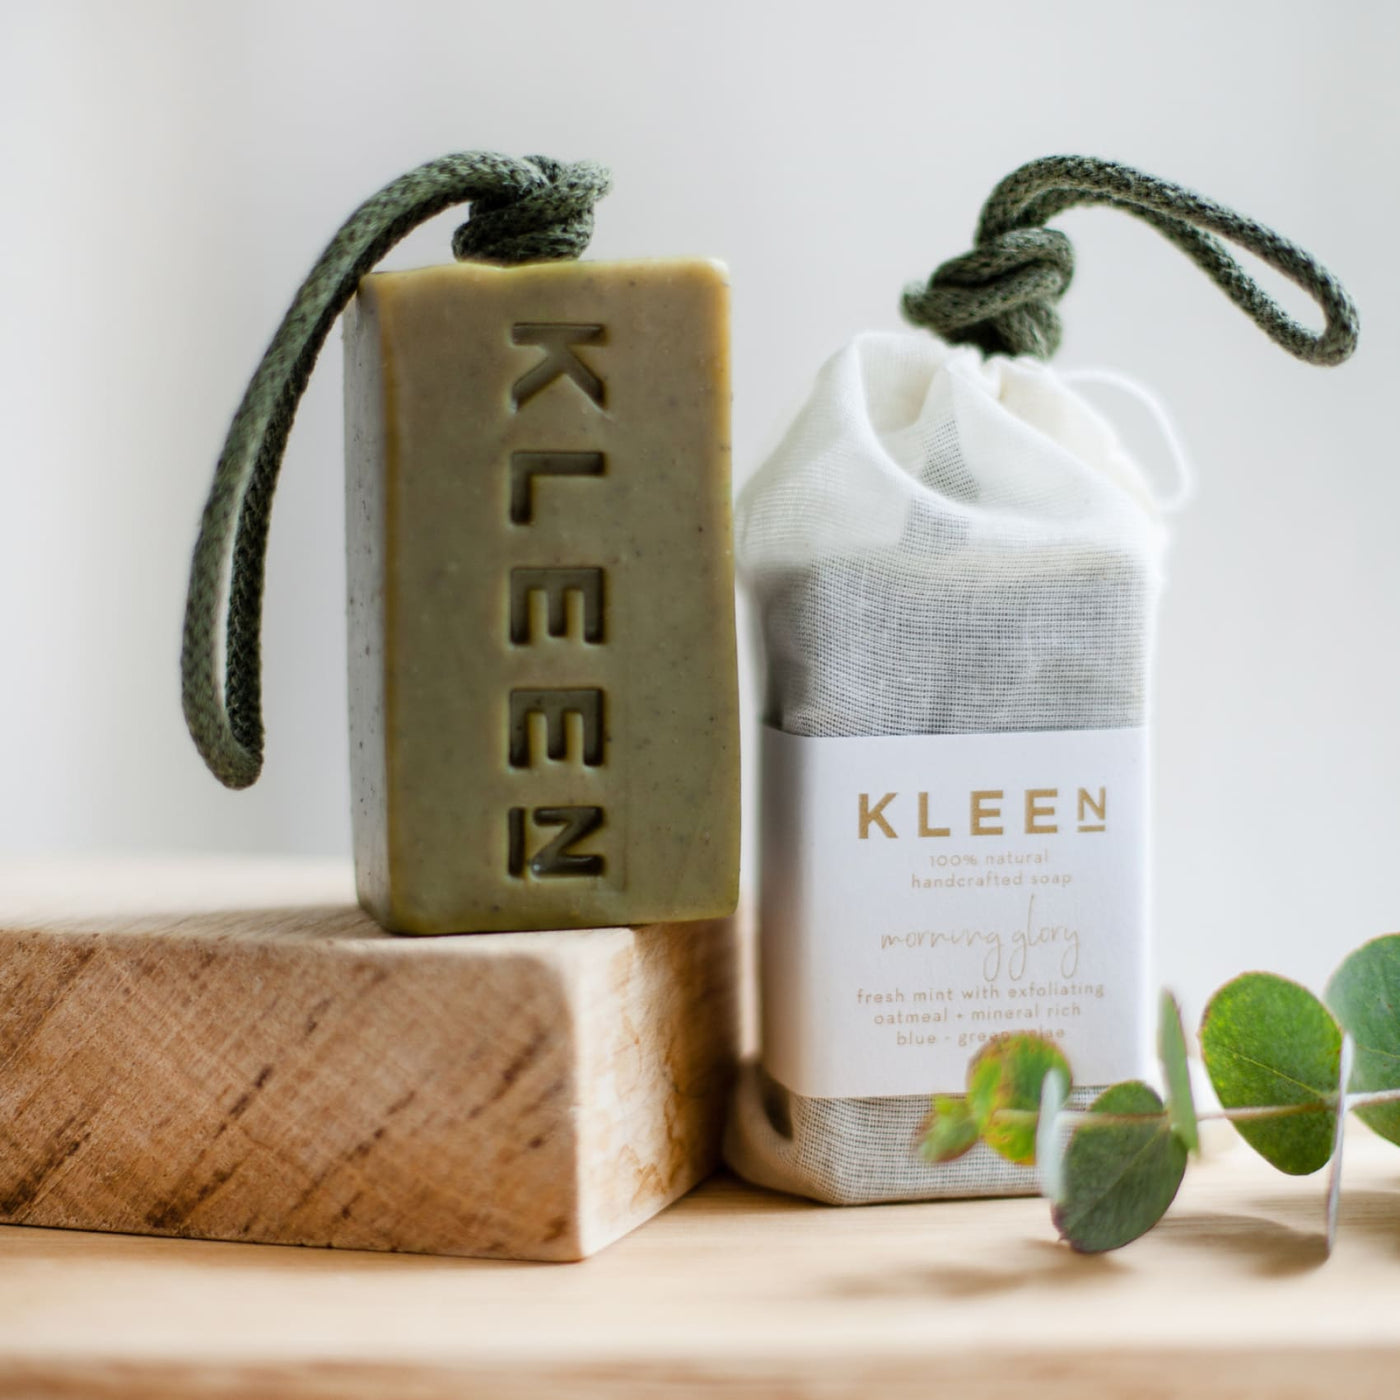 Kleen - Morning Glory Soap on a Rope